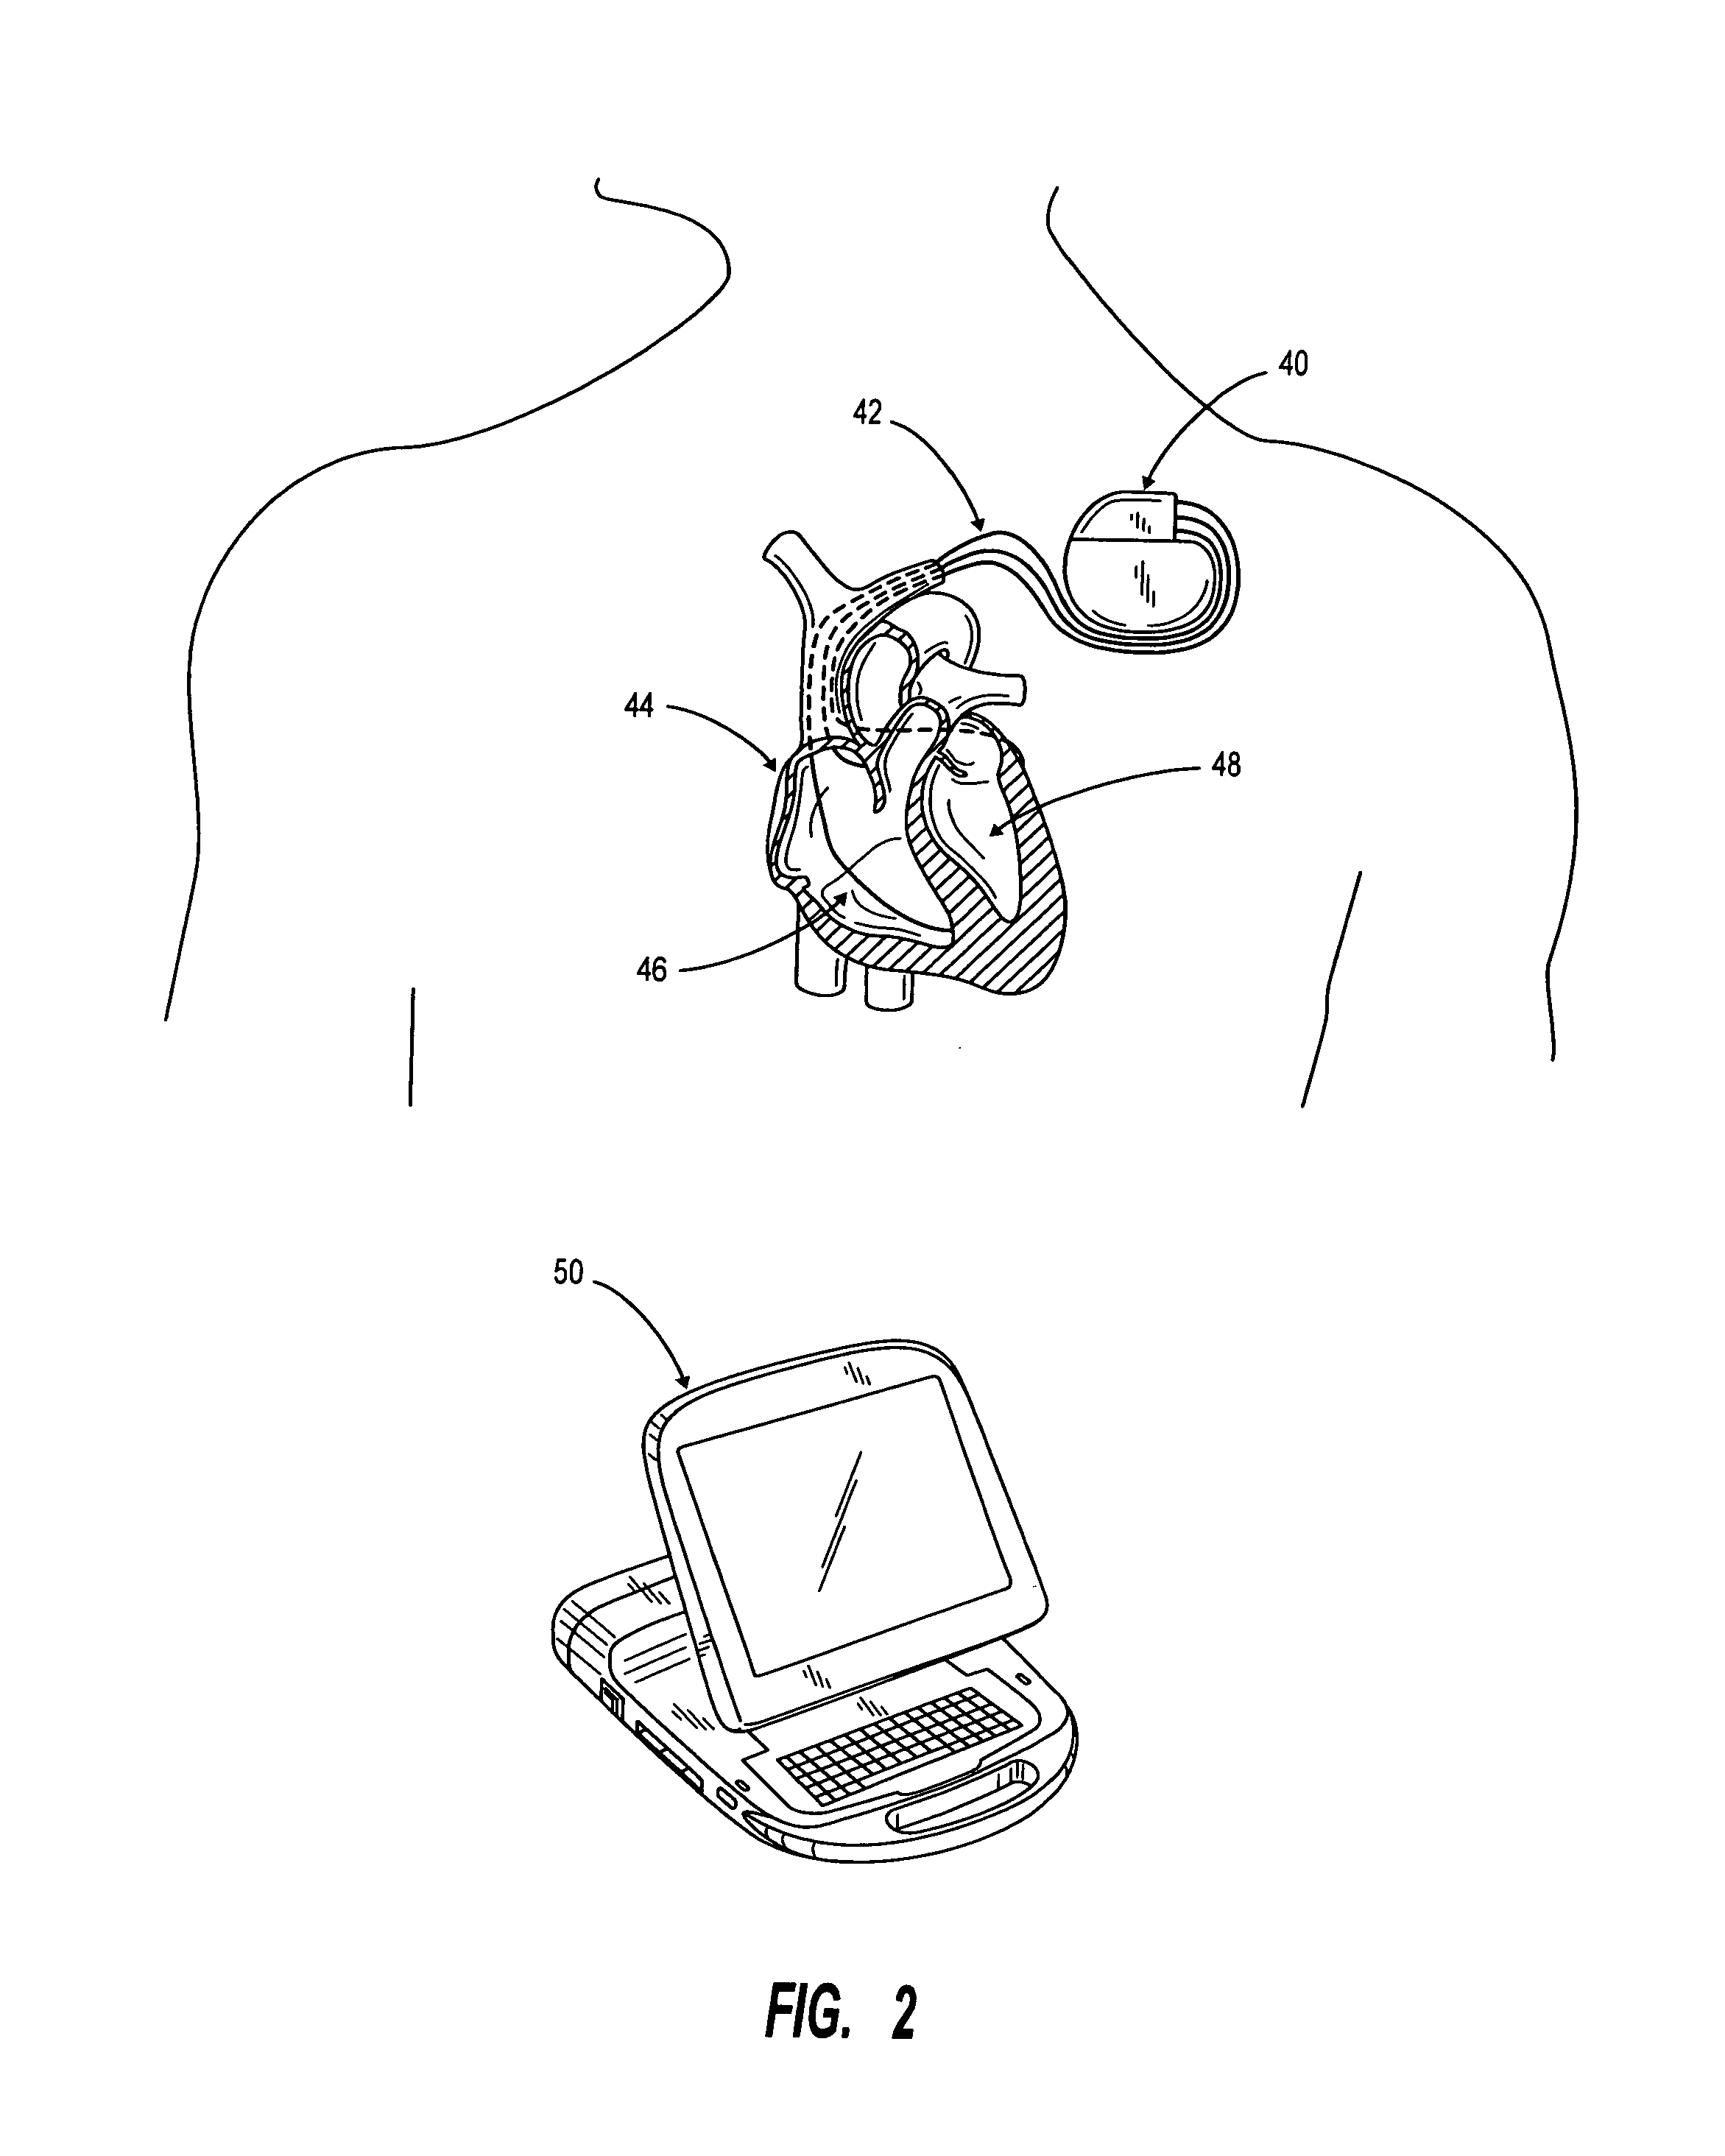 Method of optimizing patient outcome from cardiac resynchronization therapy